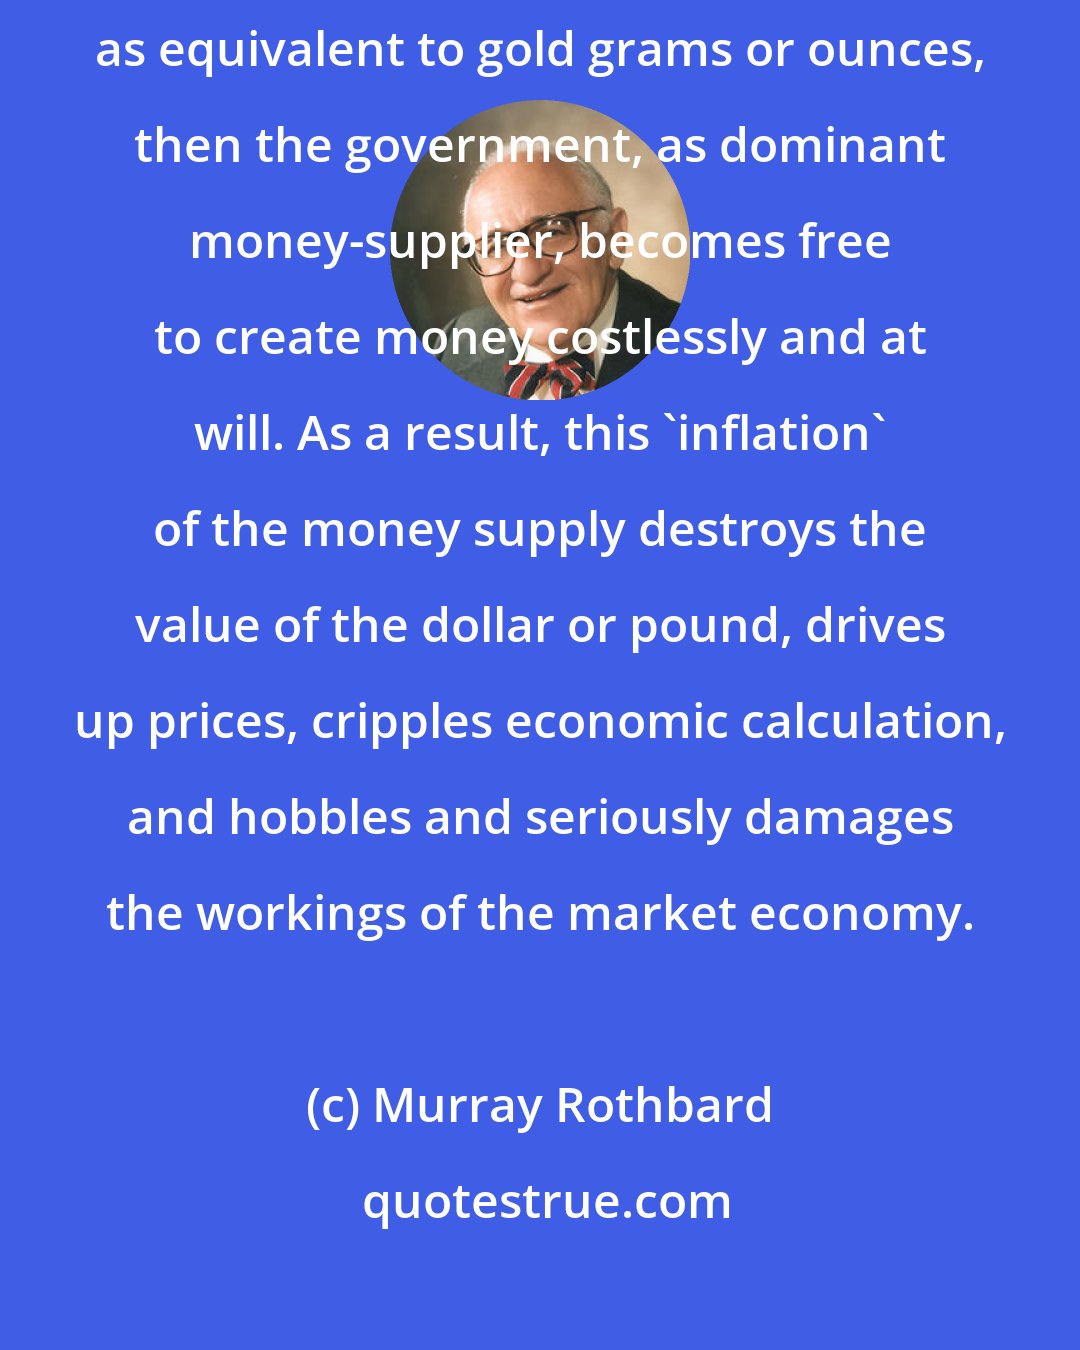 Murray Rothbard: If government manages to establish paper tickets or bank credit as money, as equivalent to gold grams or ounces, then the government, as dominant money-supplier, becomes free to create money costlessly and at will. As a result, this 'inflation' of the money supply destroys the value of the dollar or pound, drives up prices, cripples economic calculation, and hobbles and seriously damages the workings of the market economy.